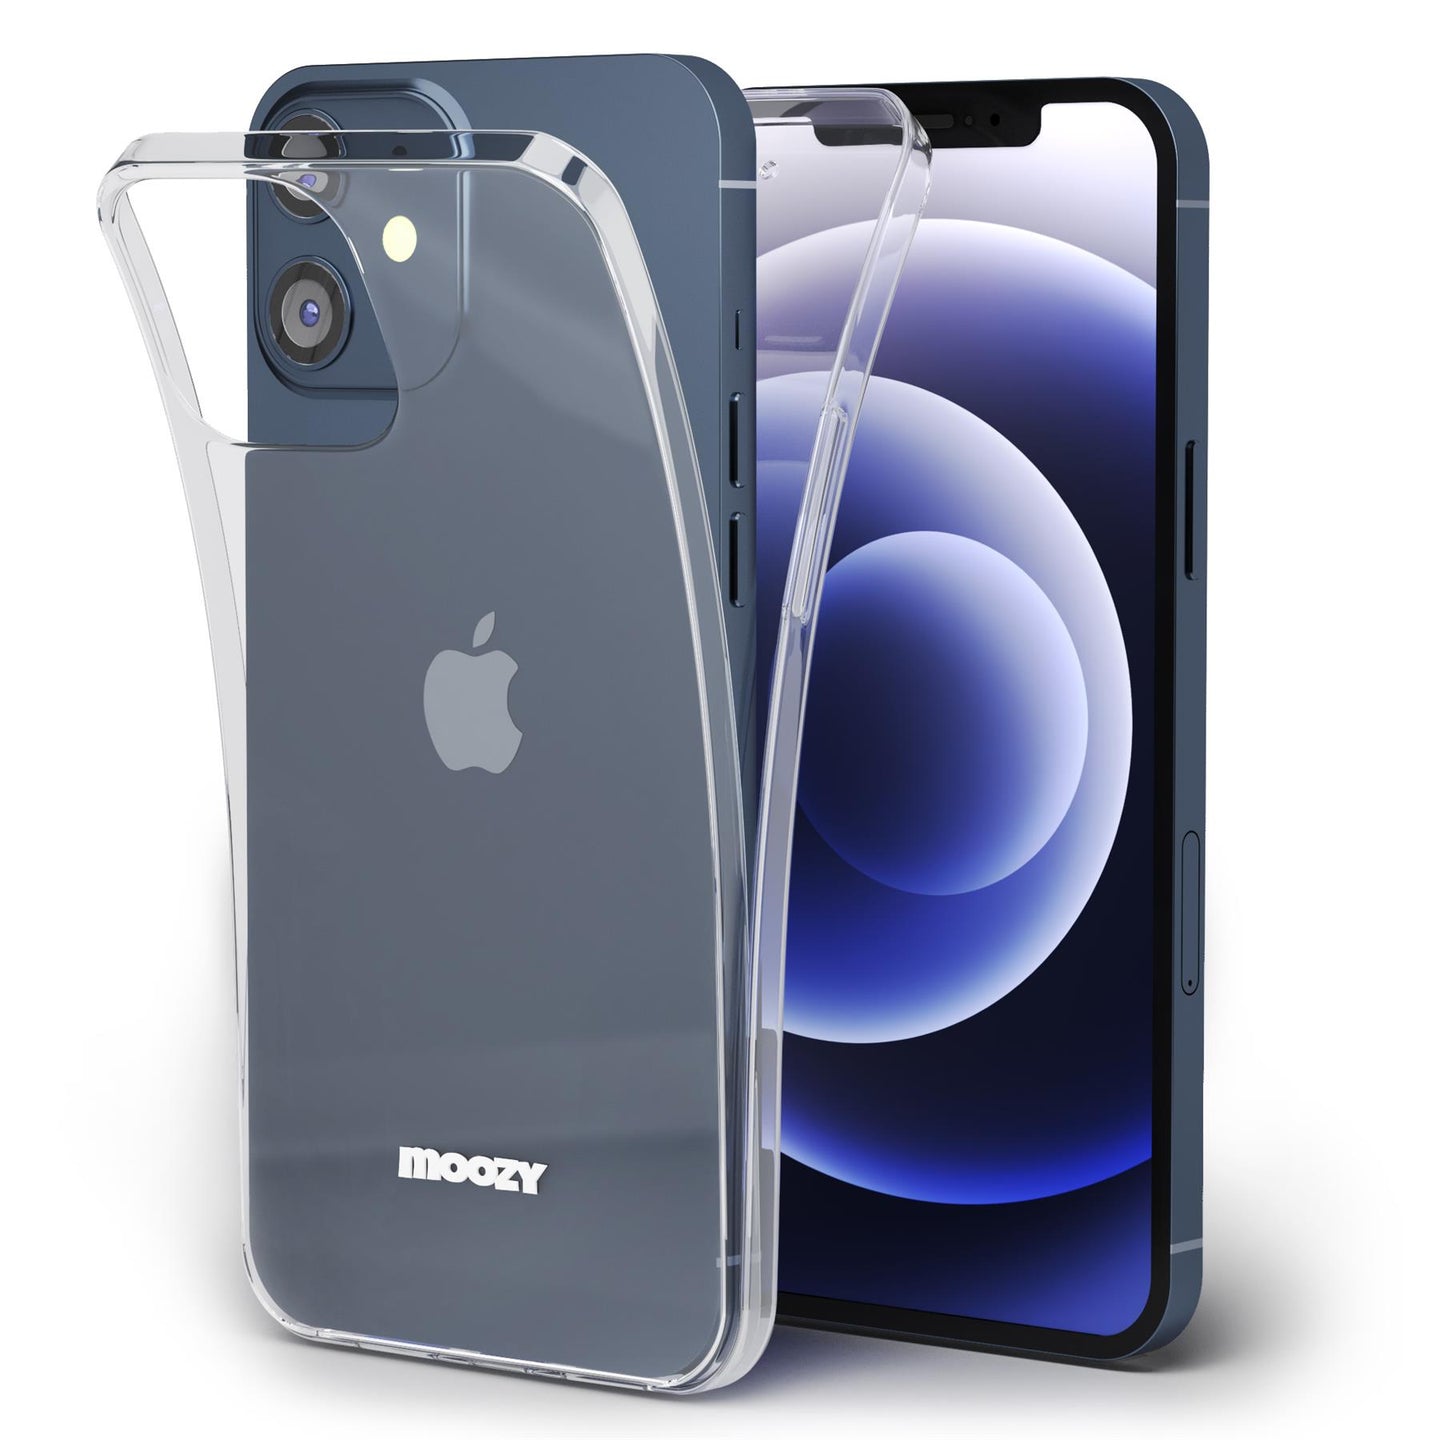 Moozy 360 Degree Case for iPhone 12 mini - Full body Front and Back Slim Clear Transparent TPU Silicone Gel Cover